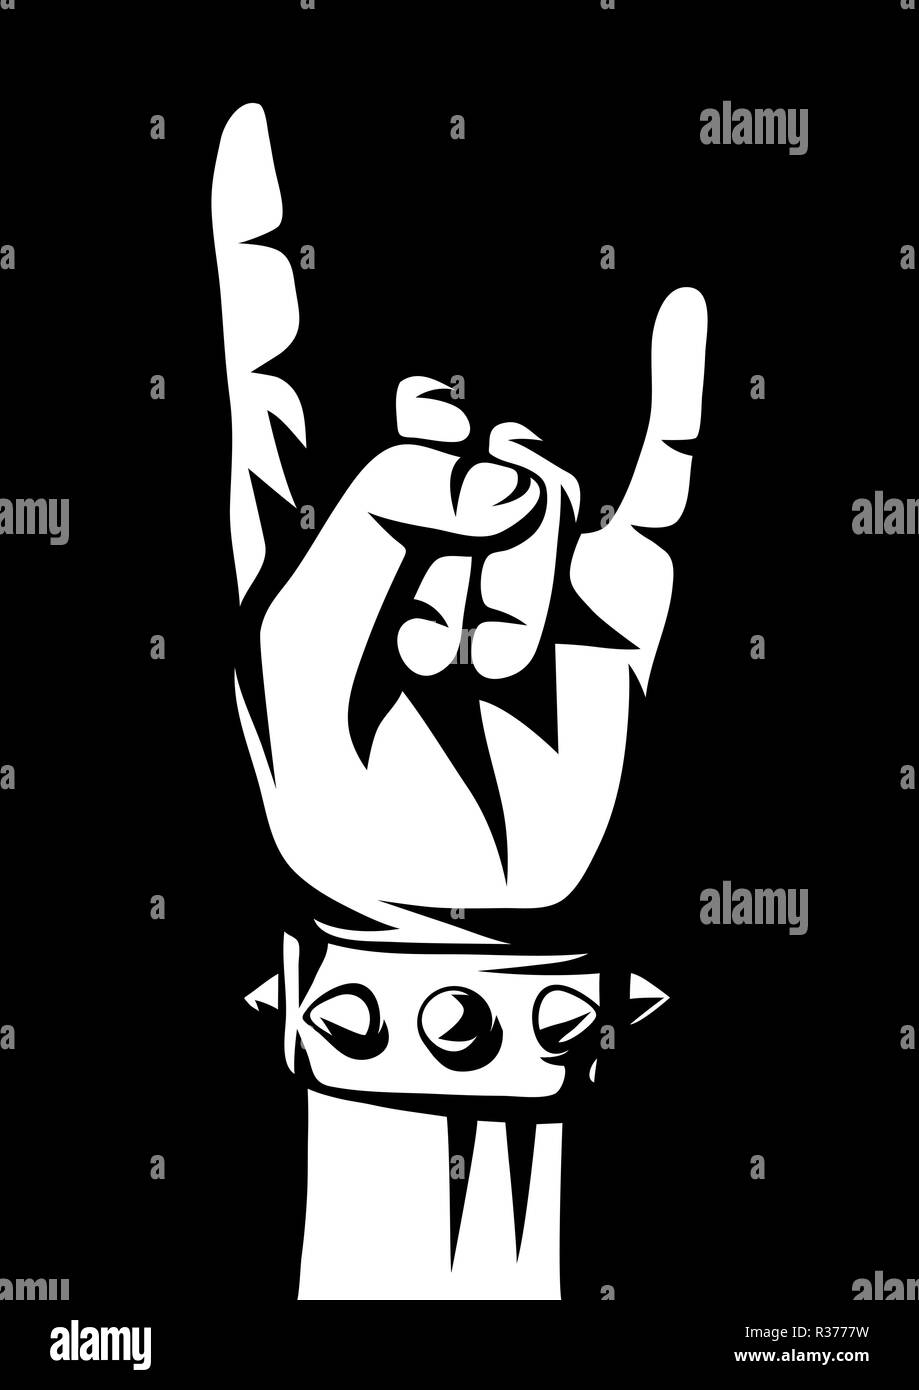 Rock and roll or heavy metal hand sign. Stock Vector